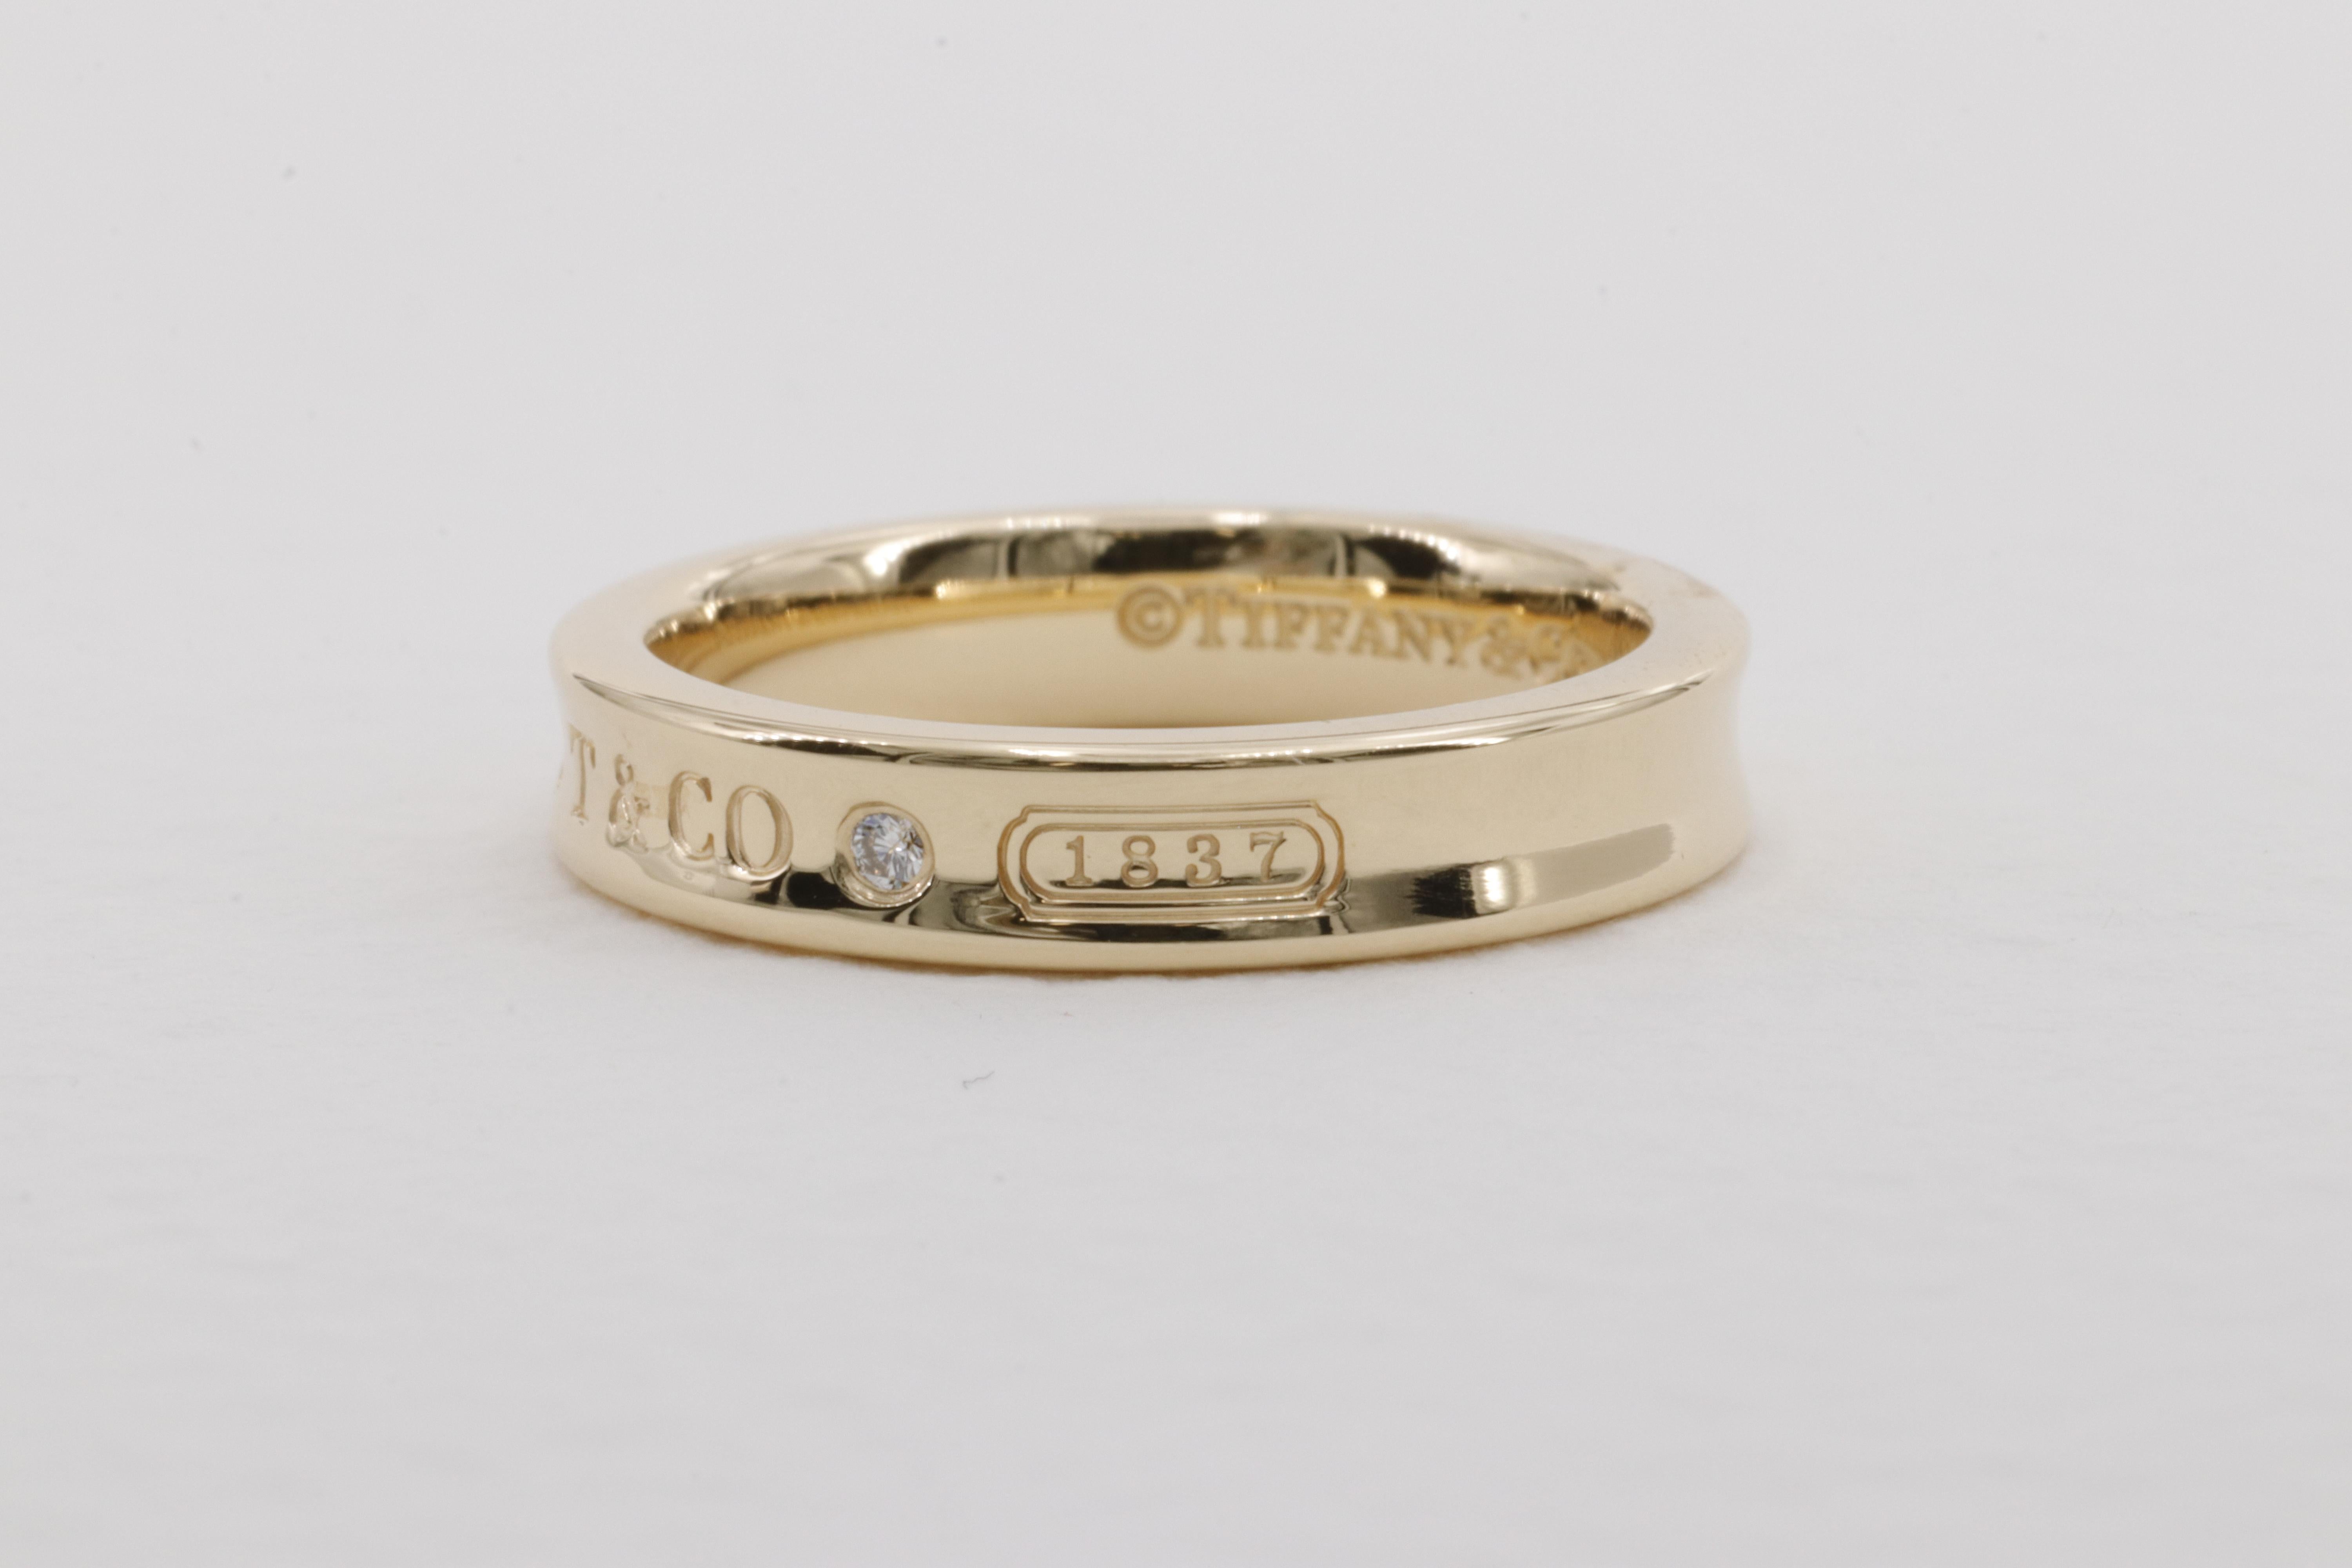 Modern Tiffany & Co. 1837 Diamond Band Ring in 18 Karat Yellow Gold  For Sale